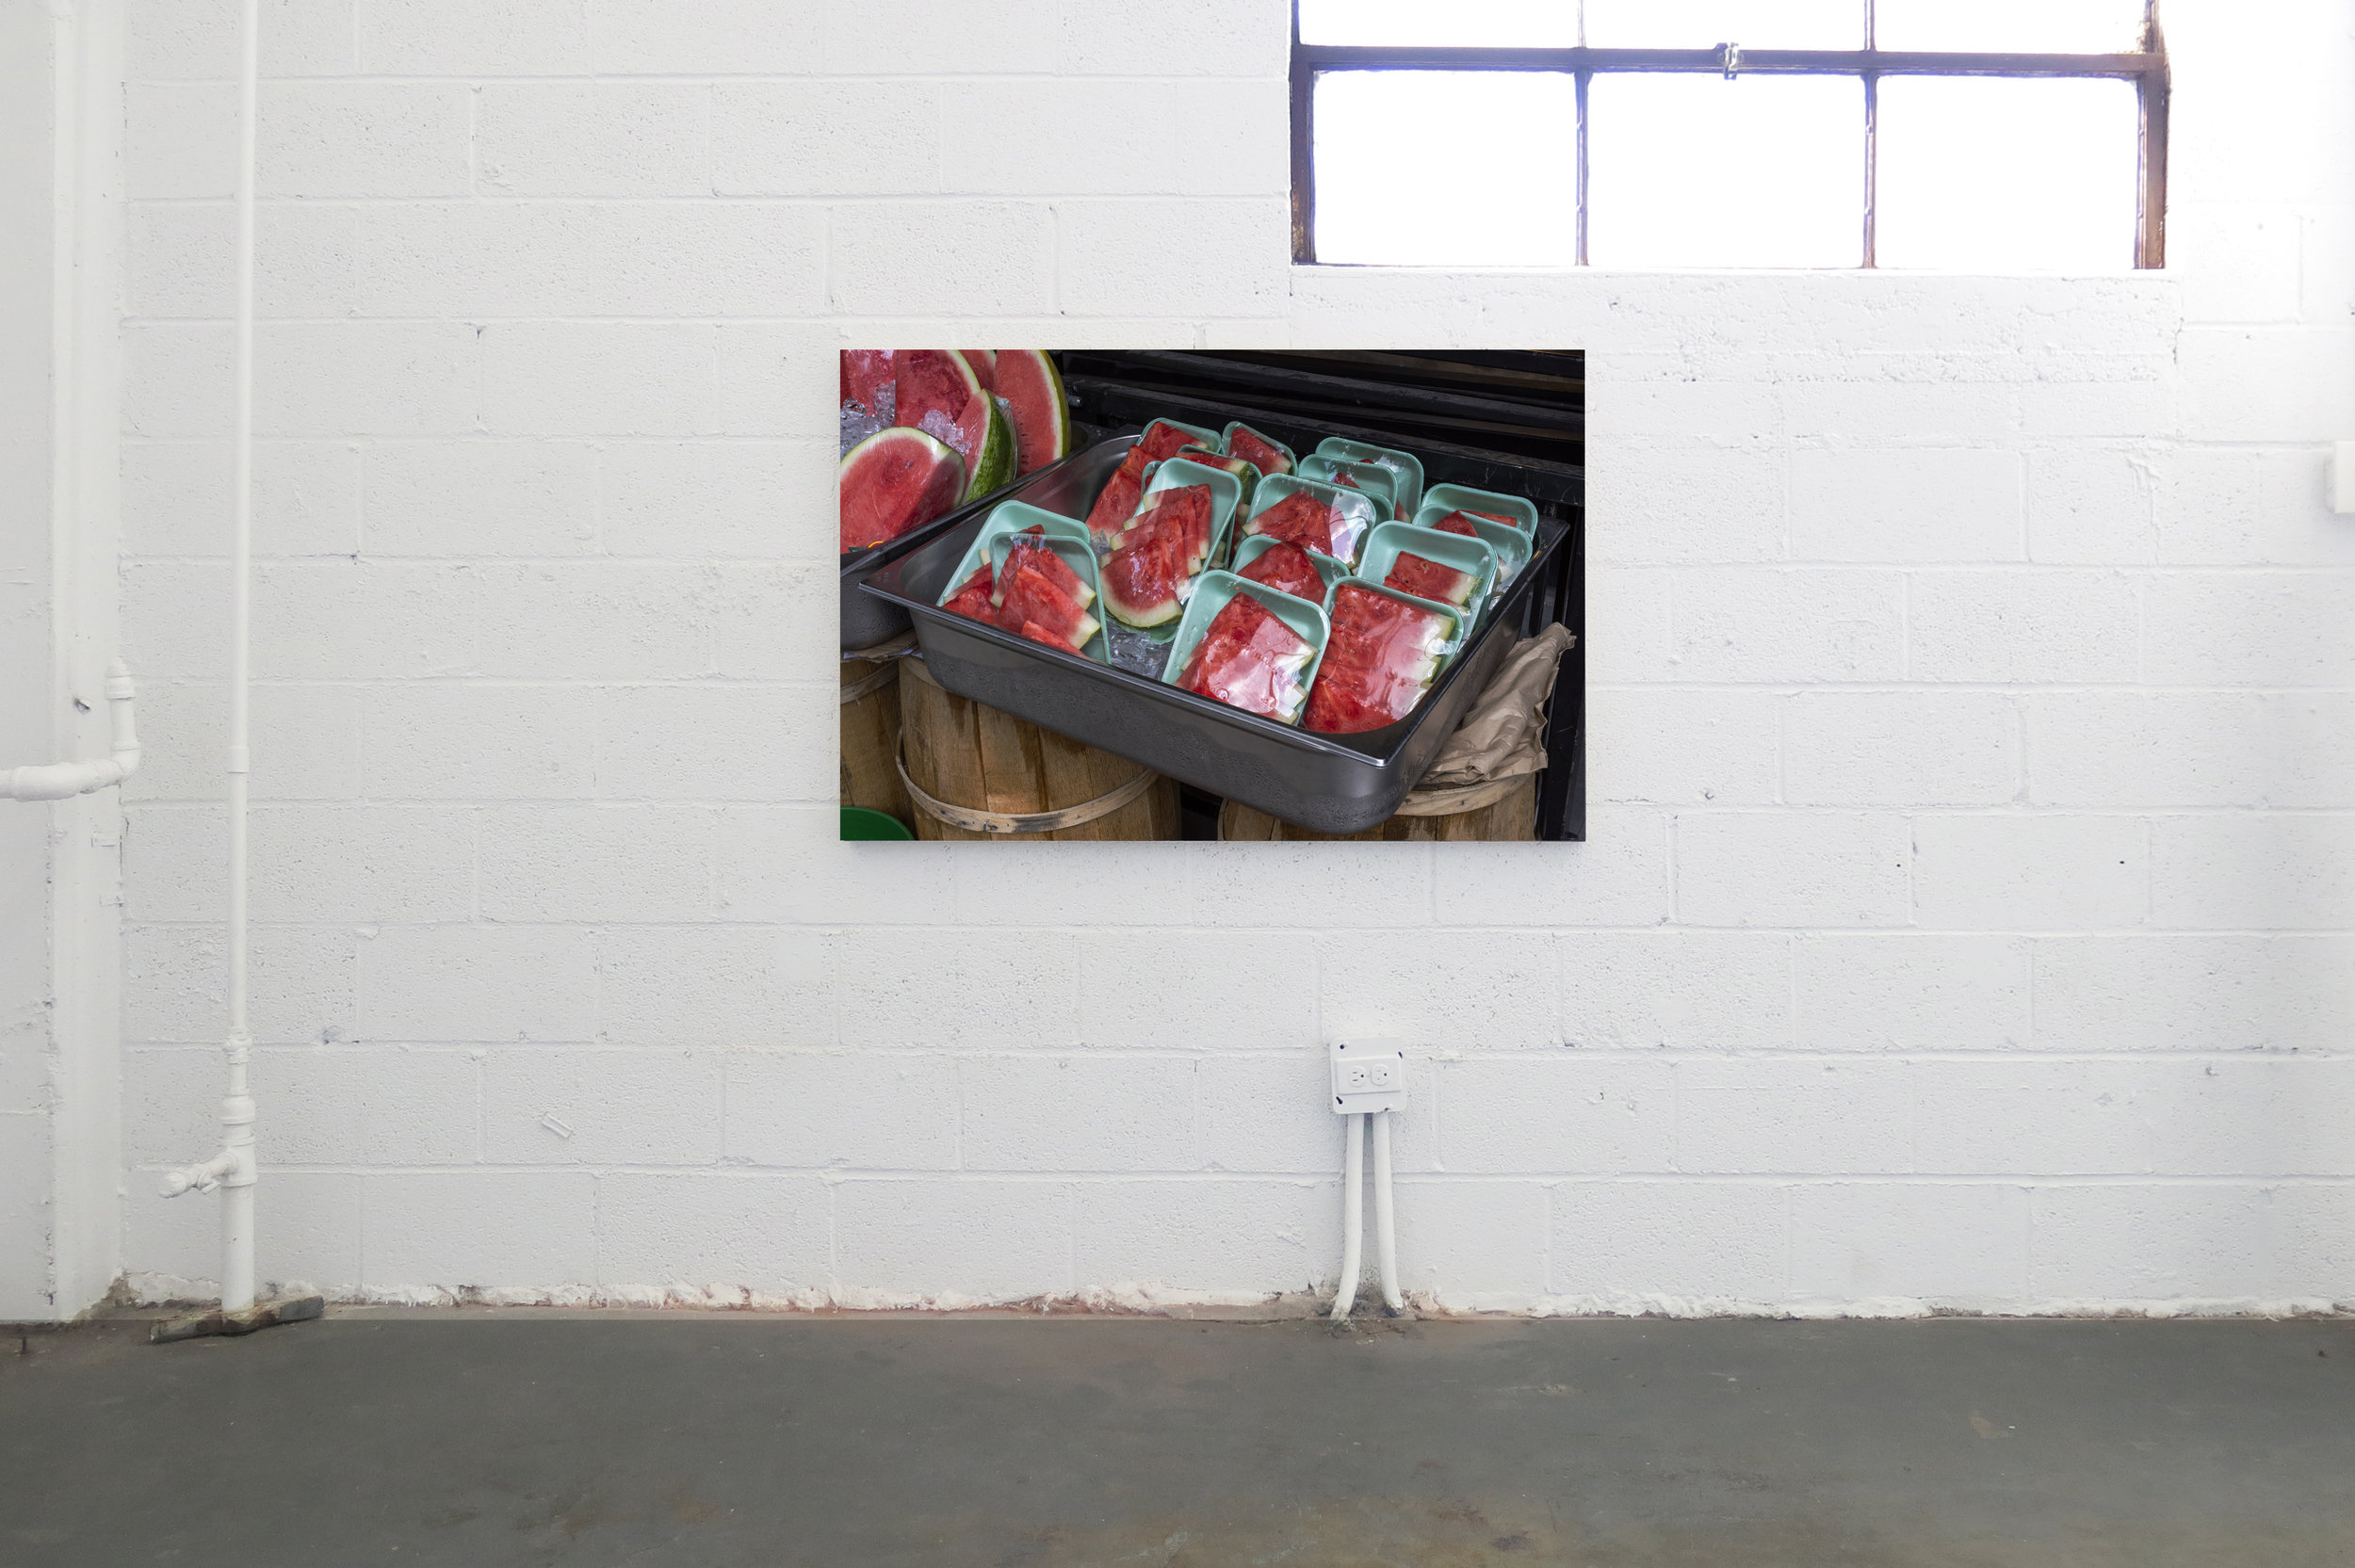  Cameron Crone,  Sliced Watermelon,  2019, Archival pigment print mounted on bass wood panel, 50 x 33 x 2” 